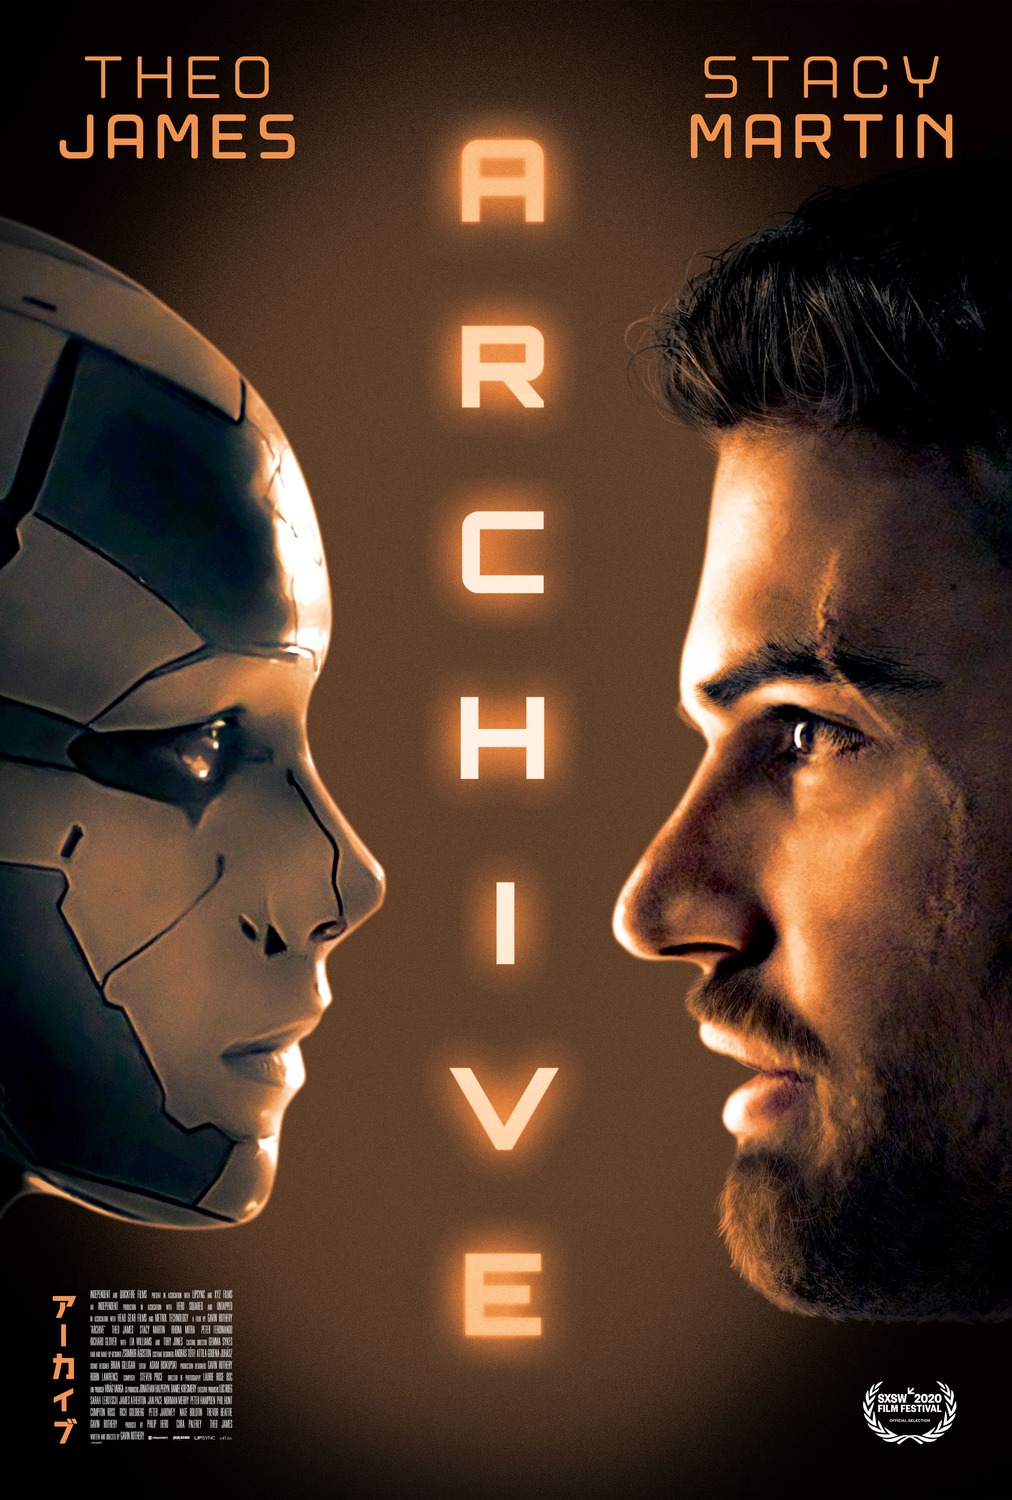 Archive Artificial intelligence Movie